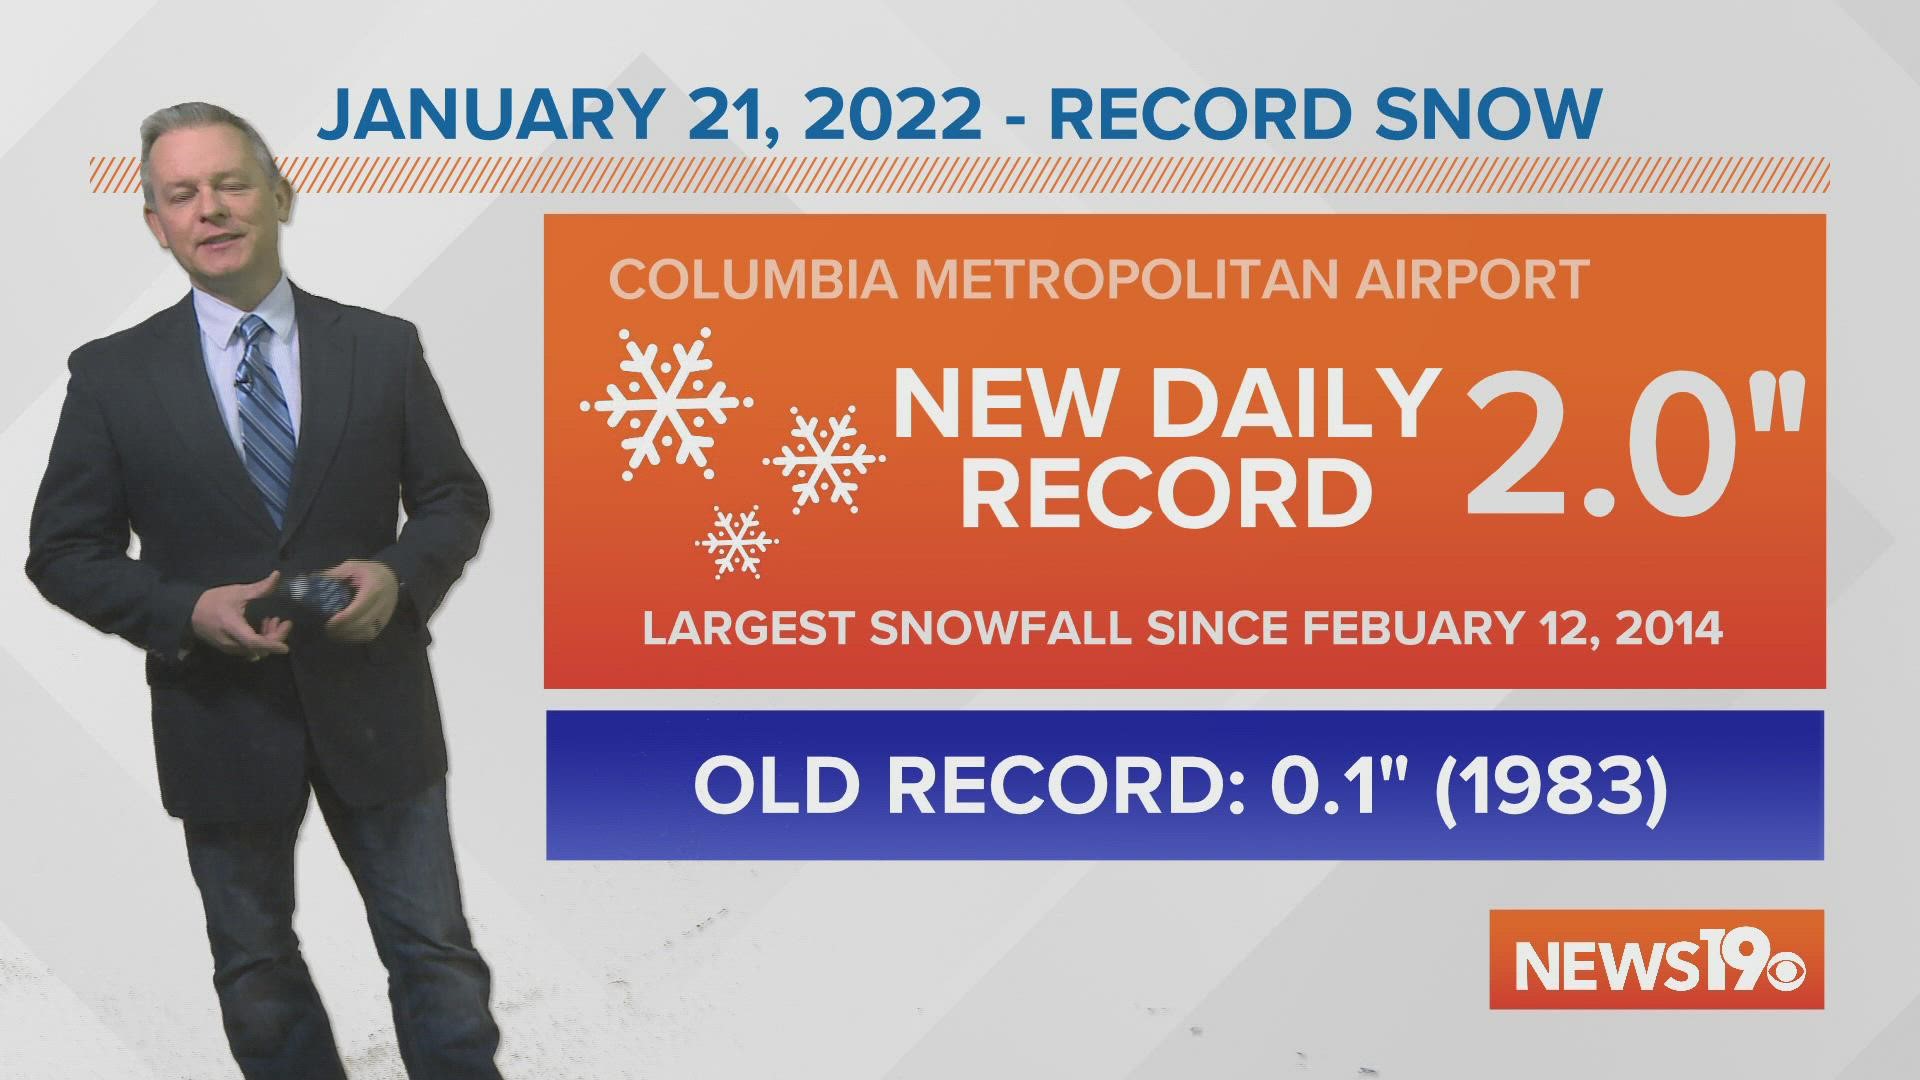 This was the largest snowfall the Columbia airport has gotten since February 12, 2014.